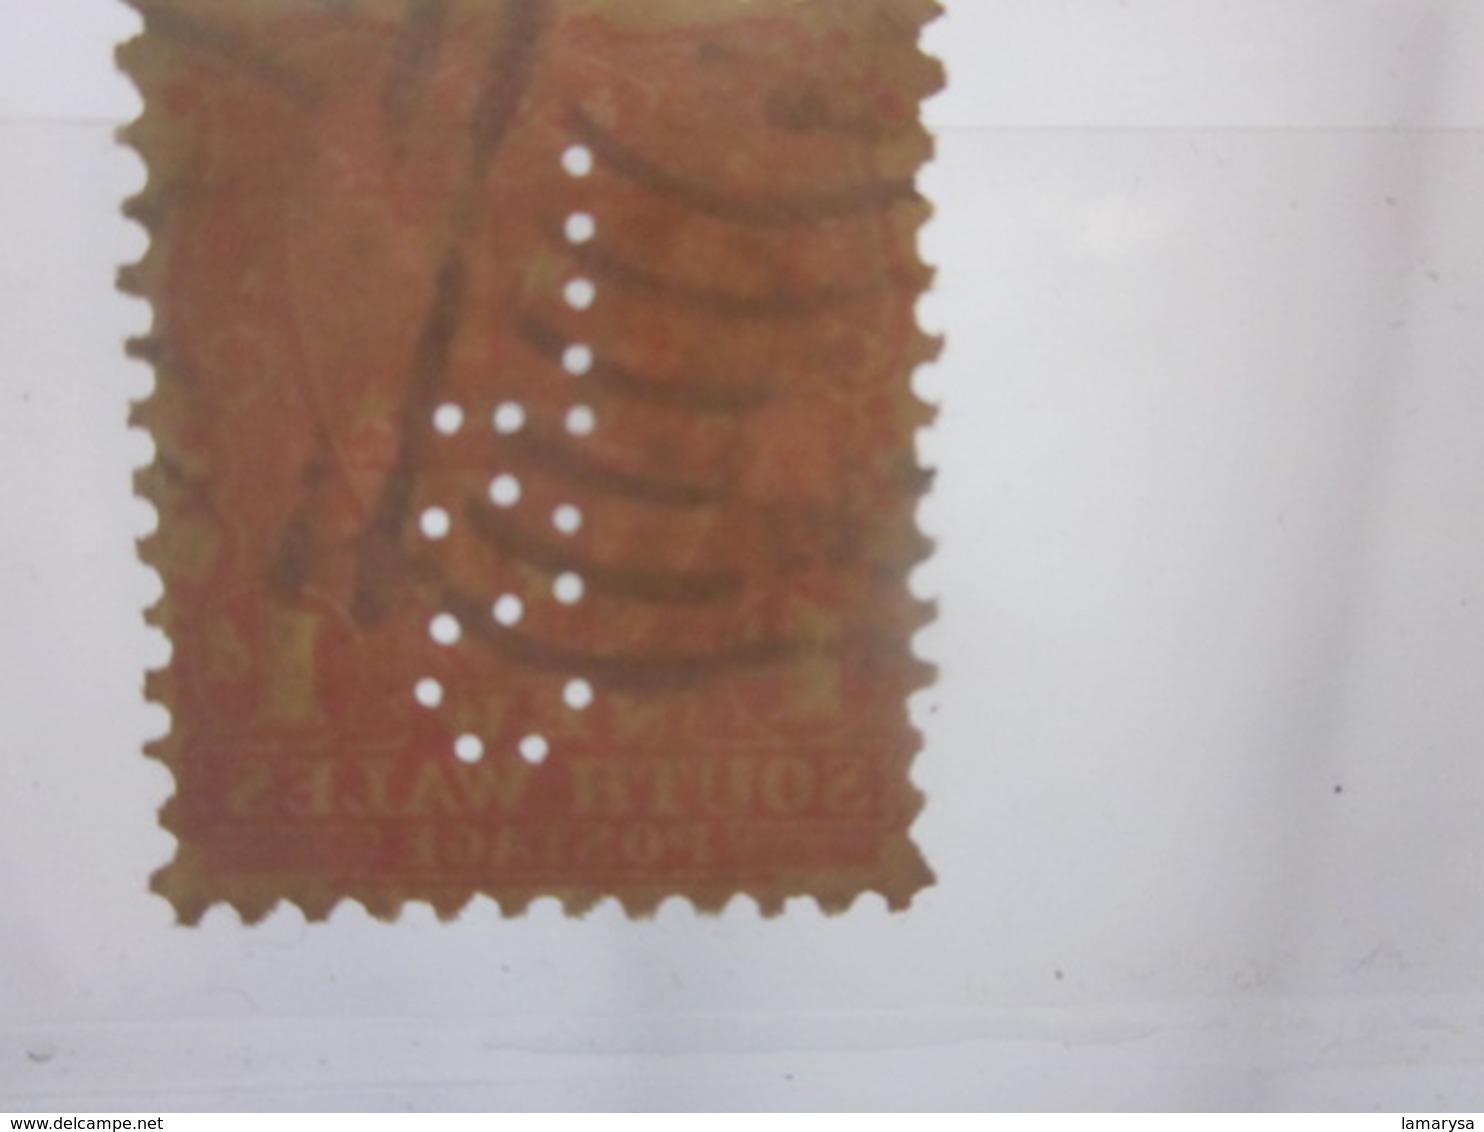 Stamp Timbre AUSTRALIE COLONY NEW SOUTH WALES Perforés Perforé Perforés Perfin Perfins Stamps Perforated Perforations LS - Perforiert/Gezähnt